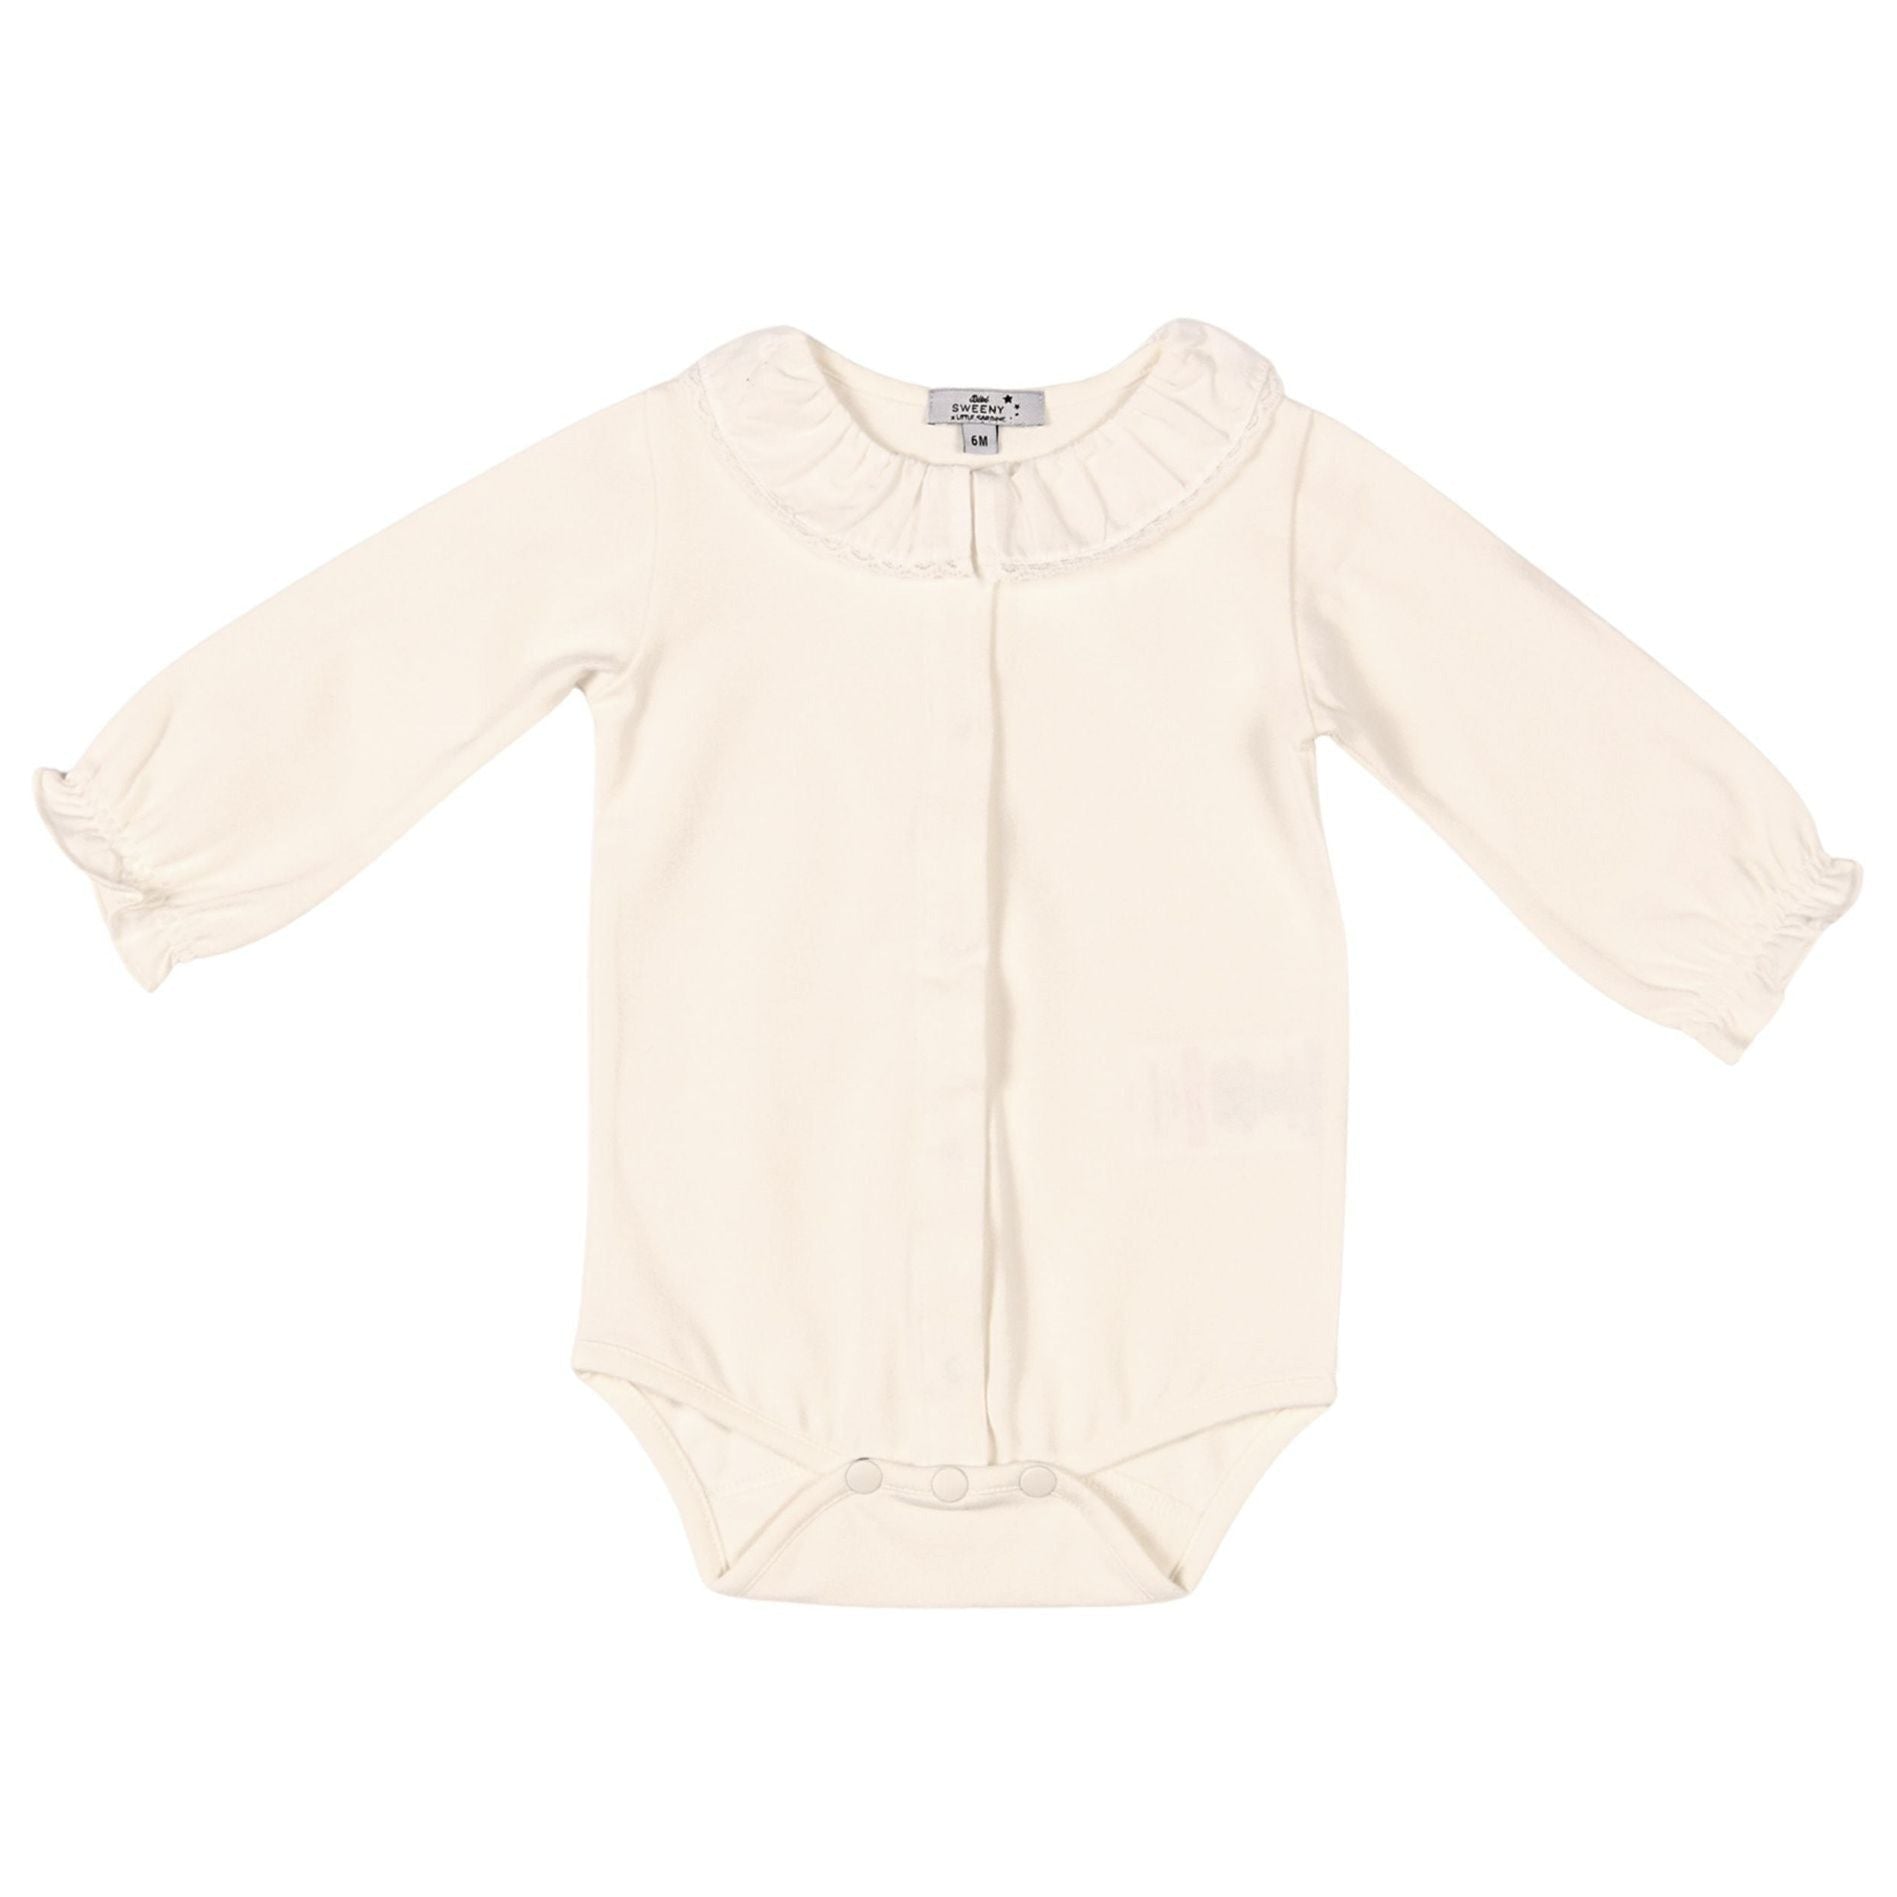 Bébé Sweeny Ivory Cotton Bodysuit for Mini Girls and Boys - CapuletKids